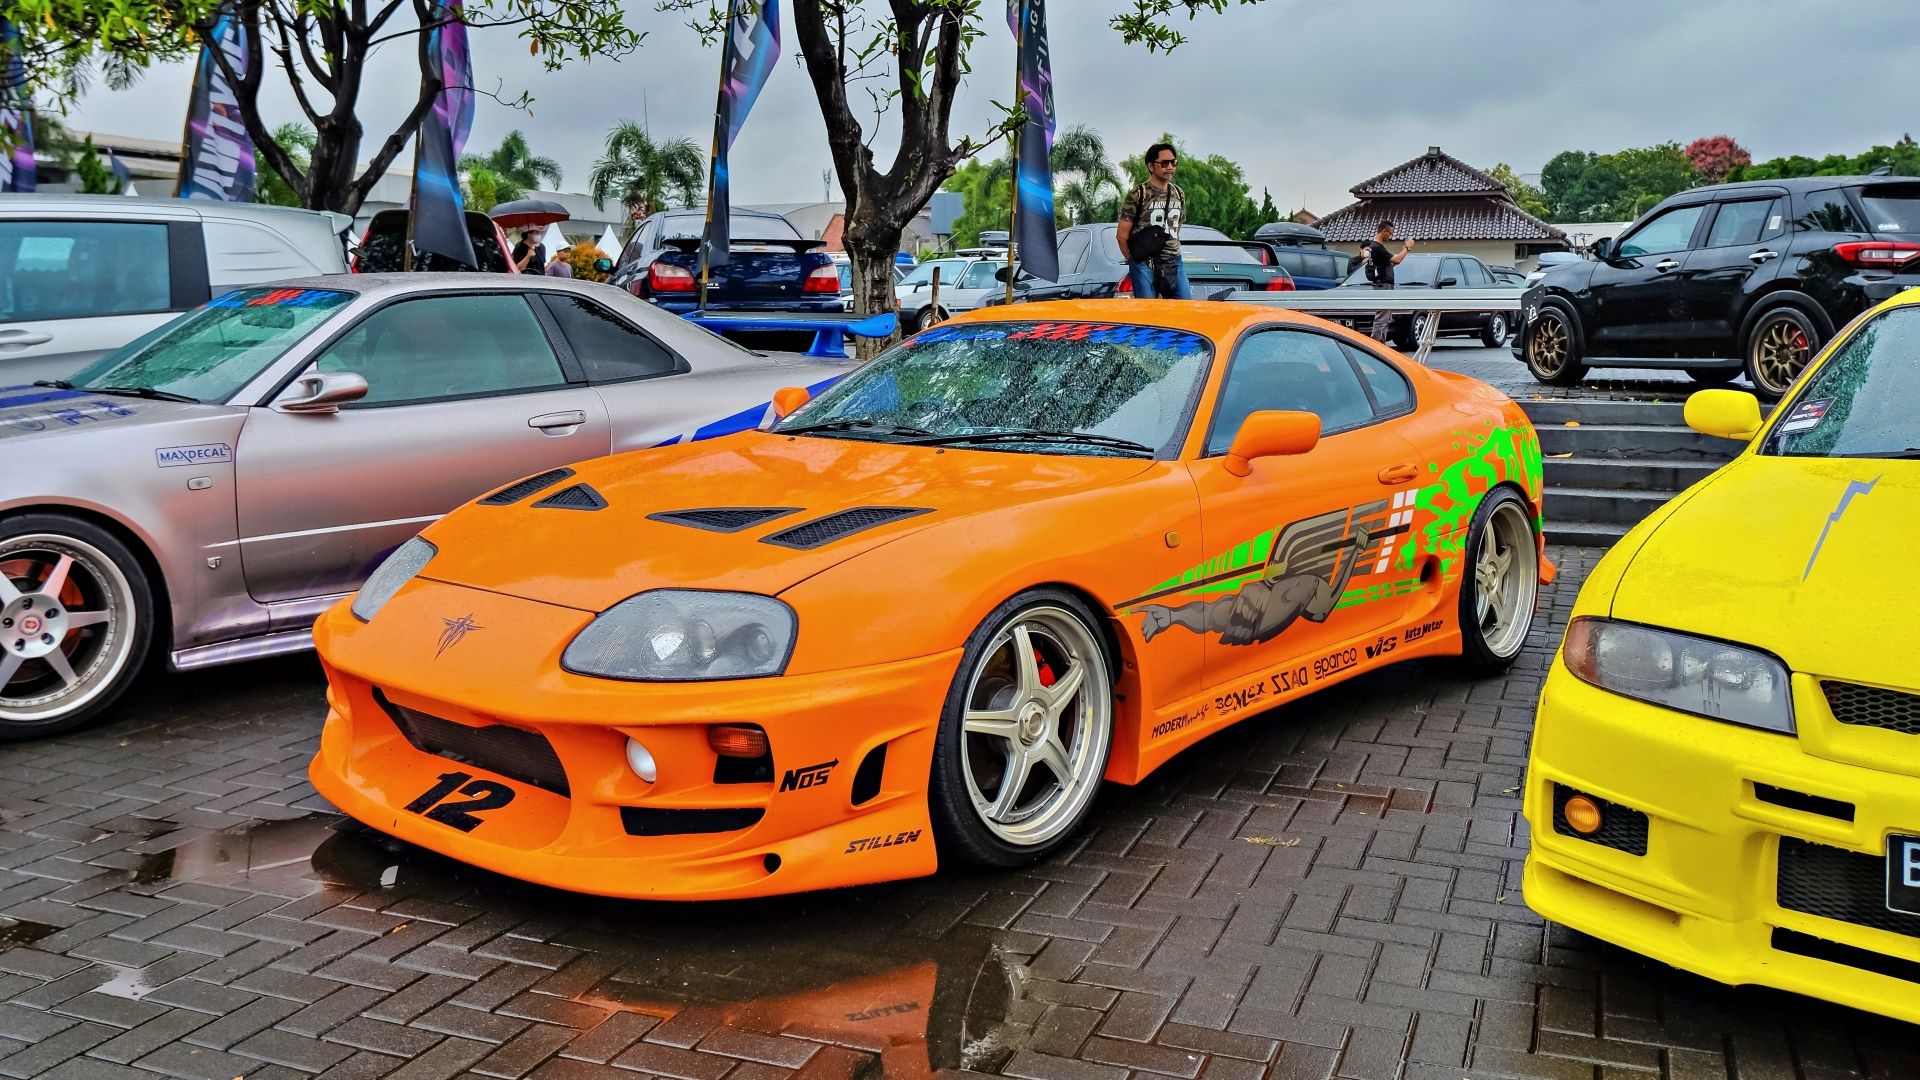 Speedwerkz Exotic Car Experience on Instagram: Toyota Supra MK4 A  nostalgic classic Timeless and holds strong today. Japan hit a home run  with this car. #speedwerkz #speedwerkzexoticcarexperience #exoticcars  #exotics #japan #supra #mk4 #